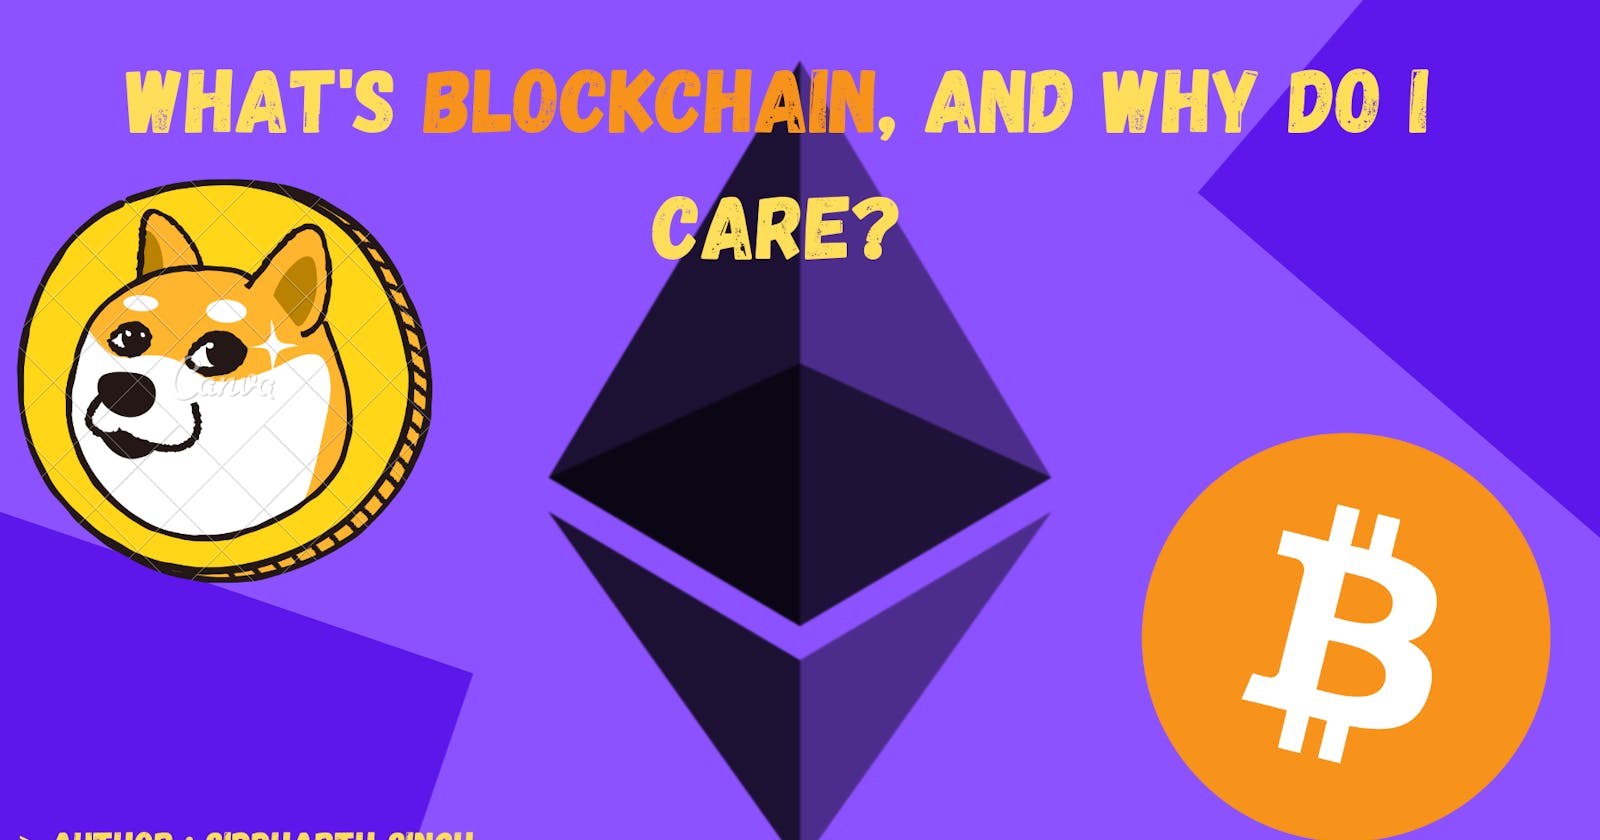 Wait, what and why Blockchain ? 🤔